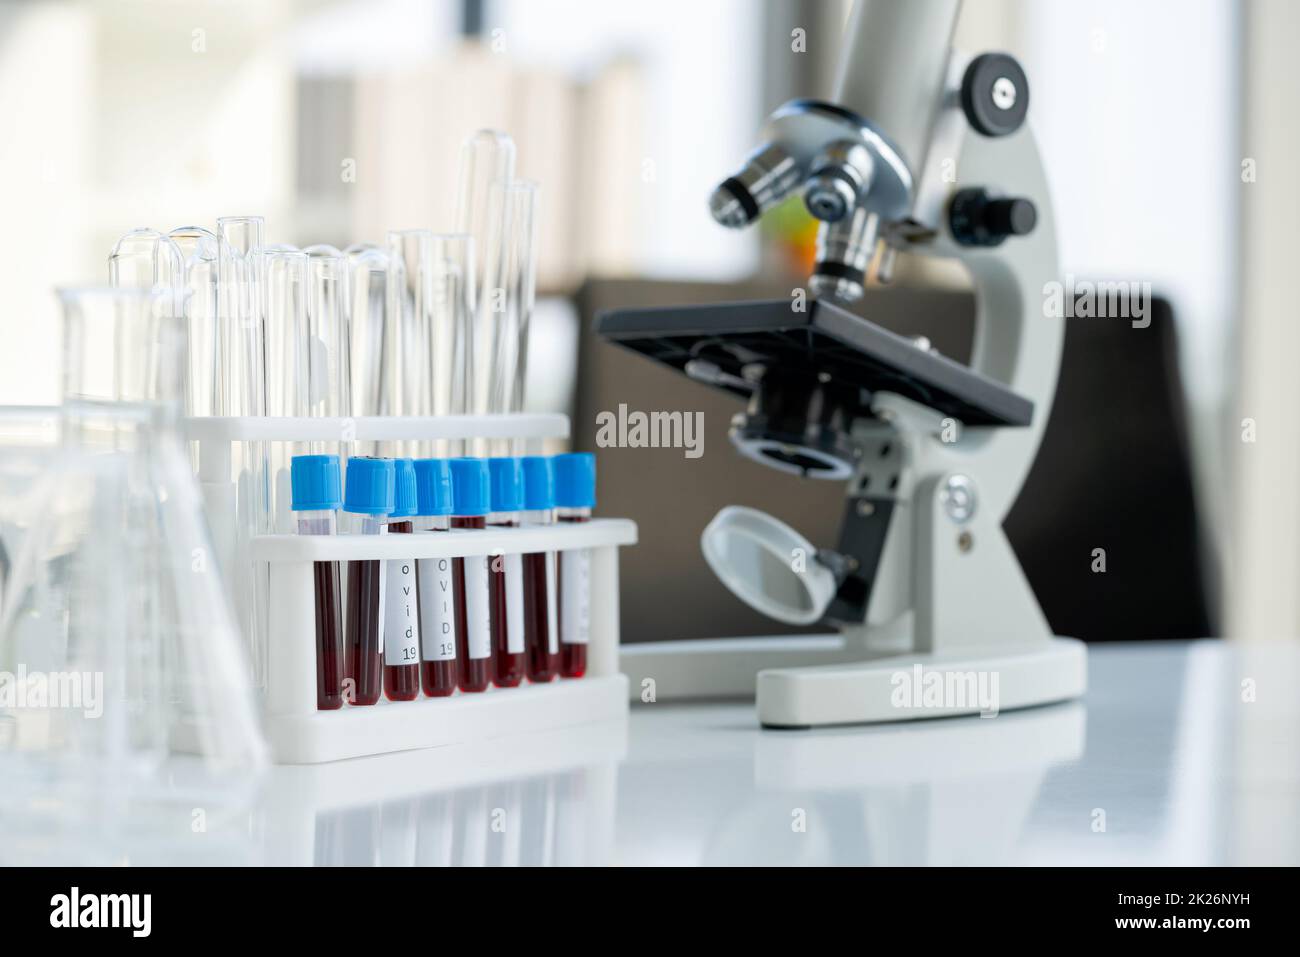 Blood collection tubes from covid 19 patients place next to microscope on white laboratory table. Coronavirus disease 2019 testing process in a laboratory preventing the spread of viral research. Stock Photo